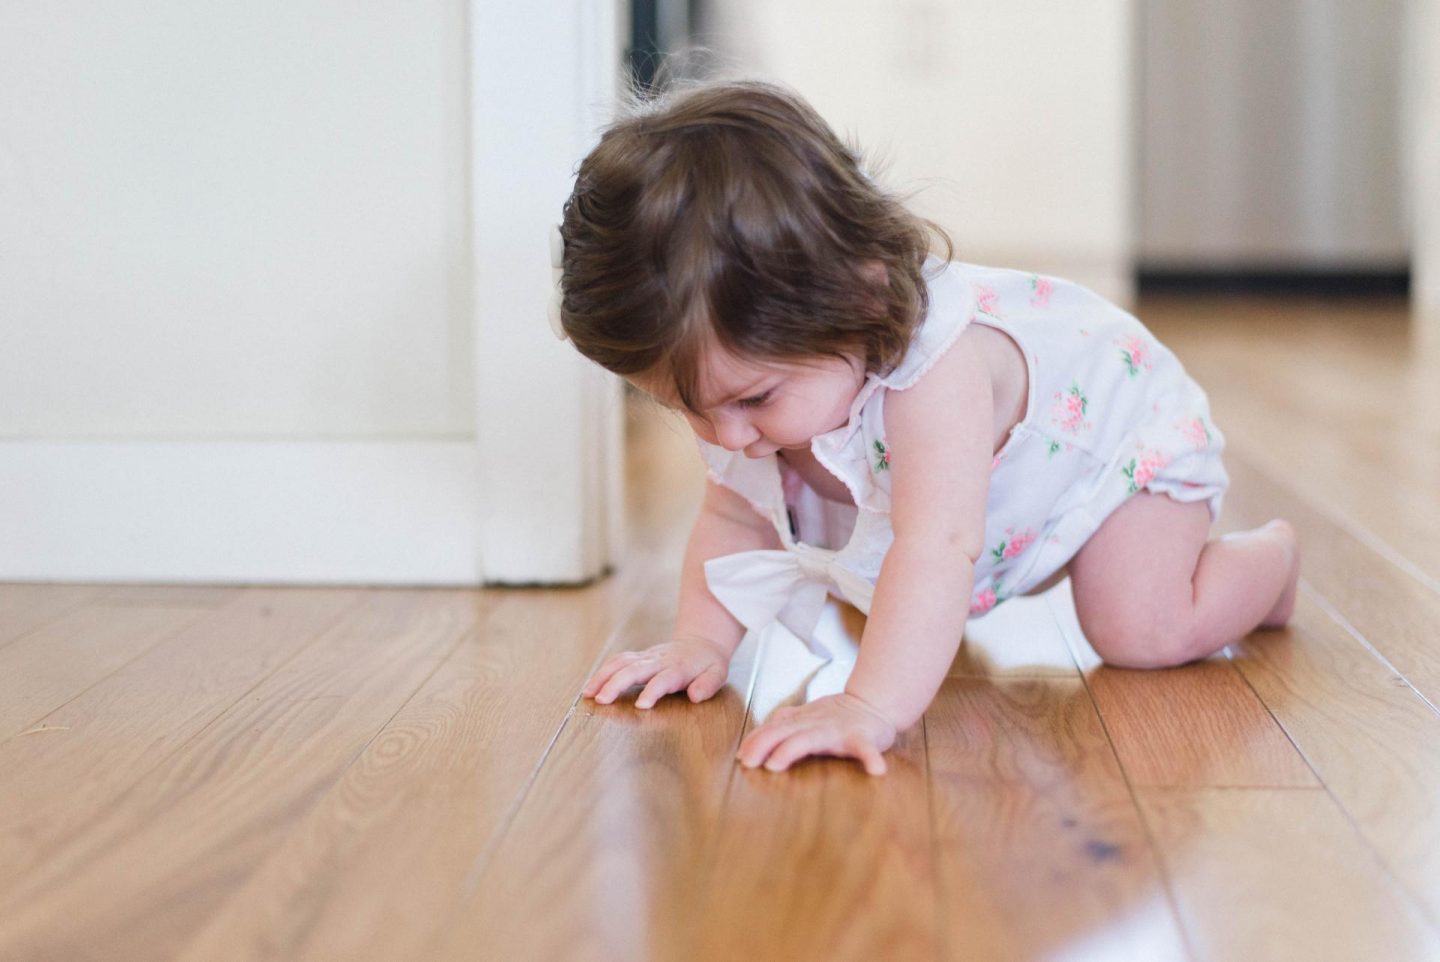 Ready, steady – go! Let’s babyproof your home.